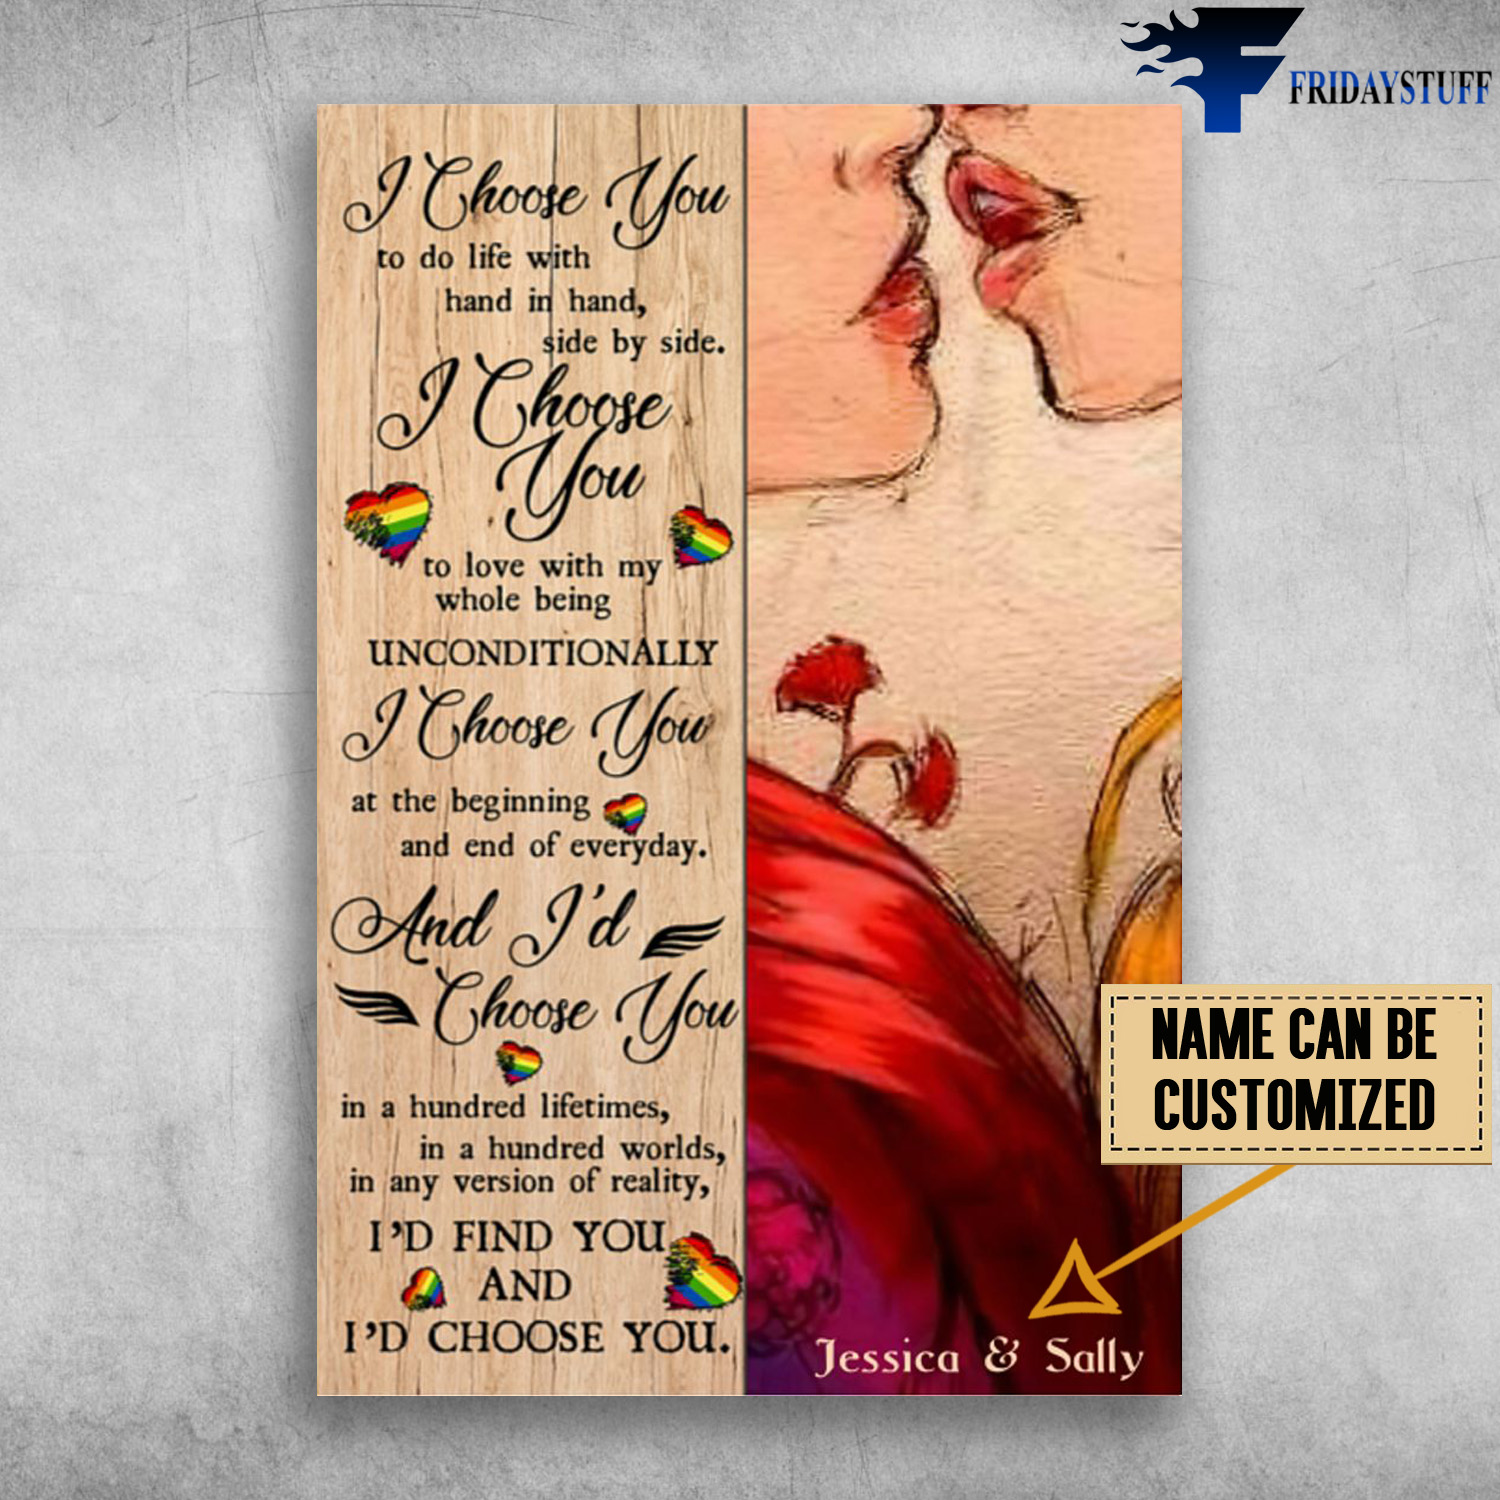 Lesbian Kiss – I Choose You To Do Life, Wit Hand In Hand, Side By Side, I Choose You To Love With My Whole Being Unconditionally, I Choose You At Beginning And End Of Everyday